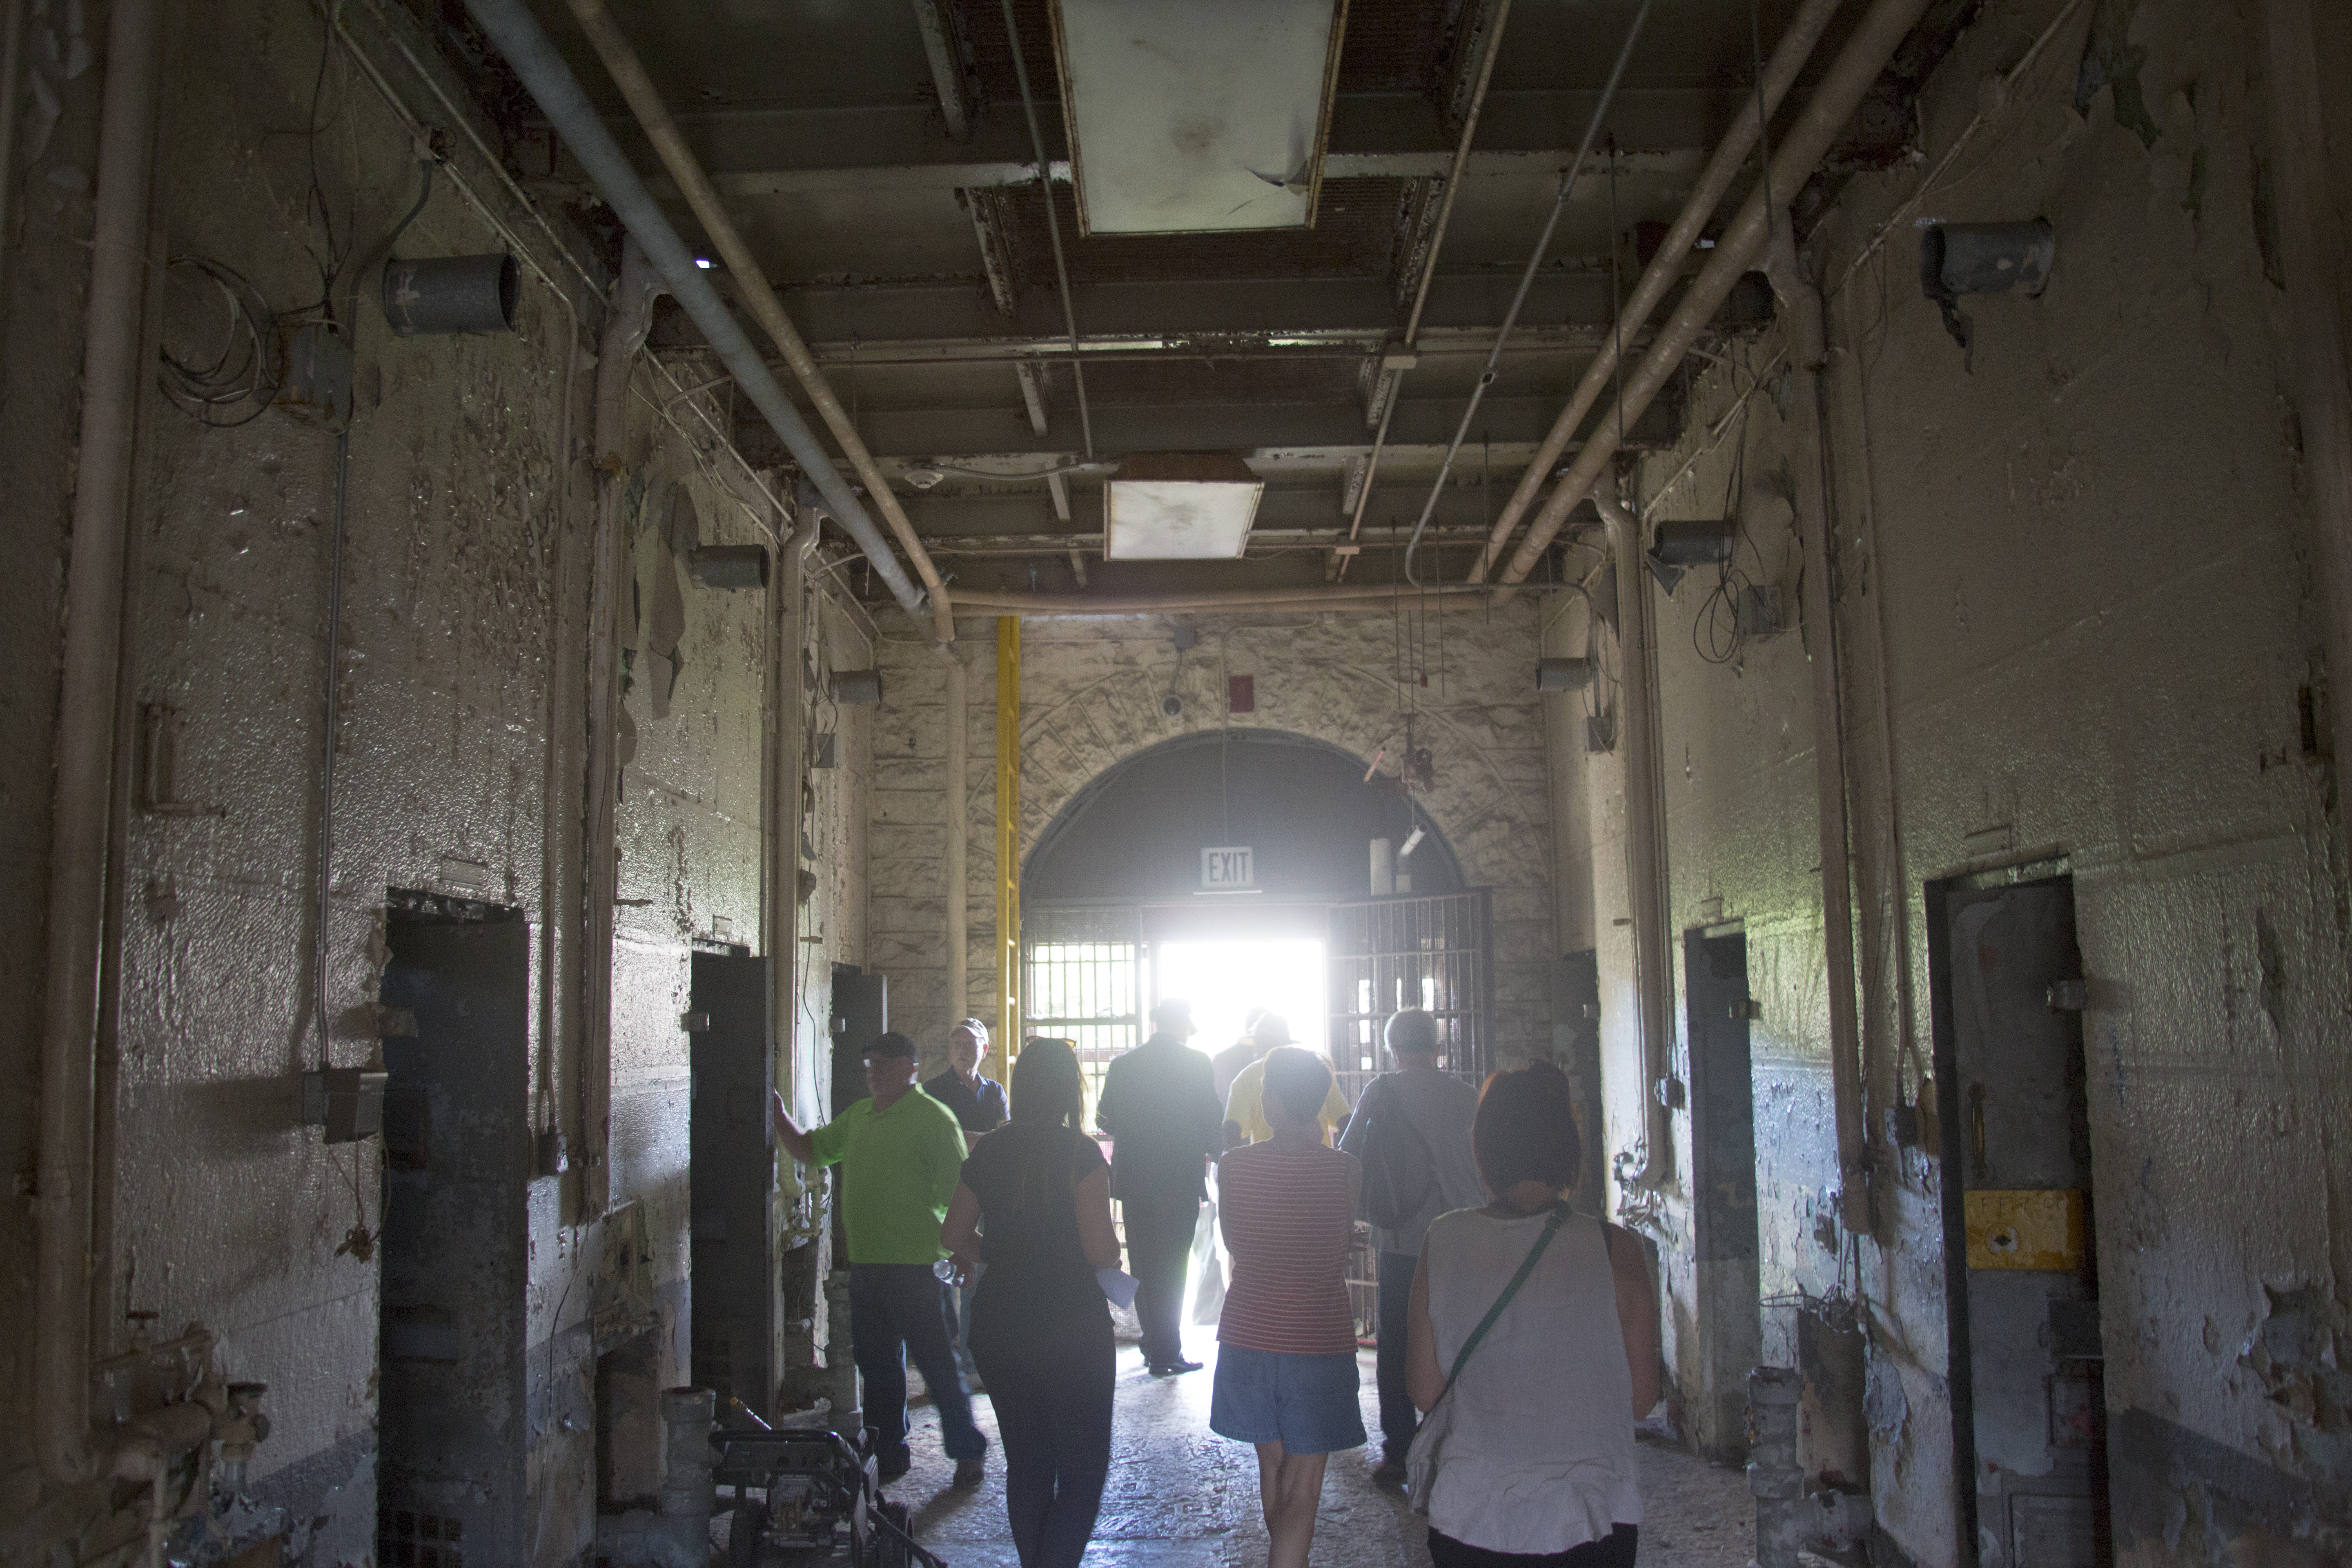 Old joliet prison north side entry way